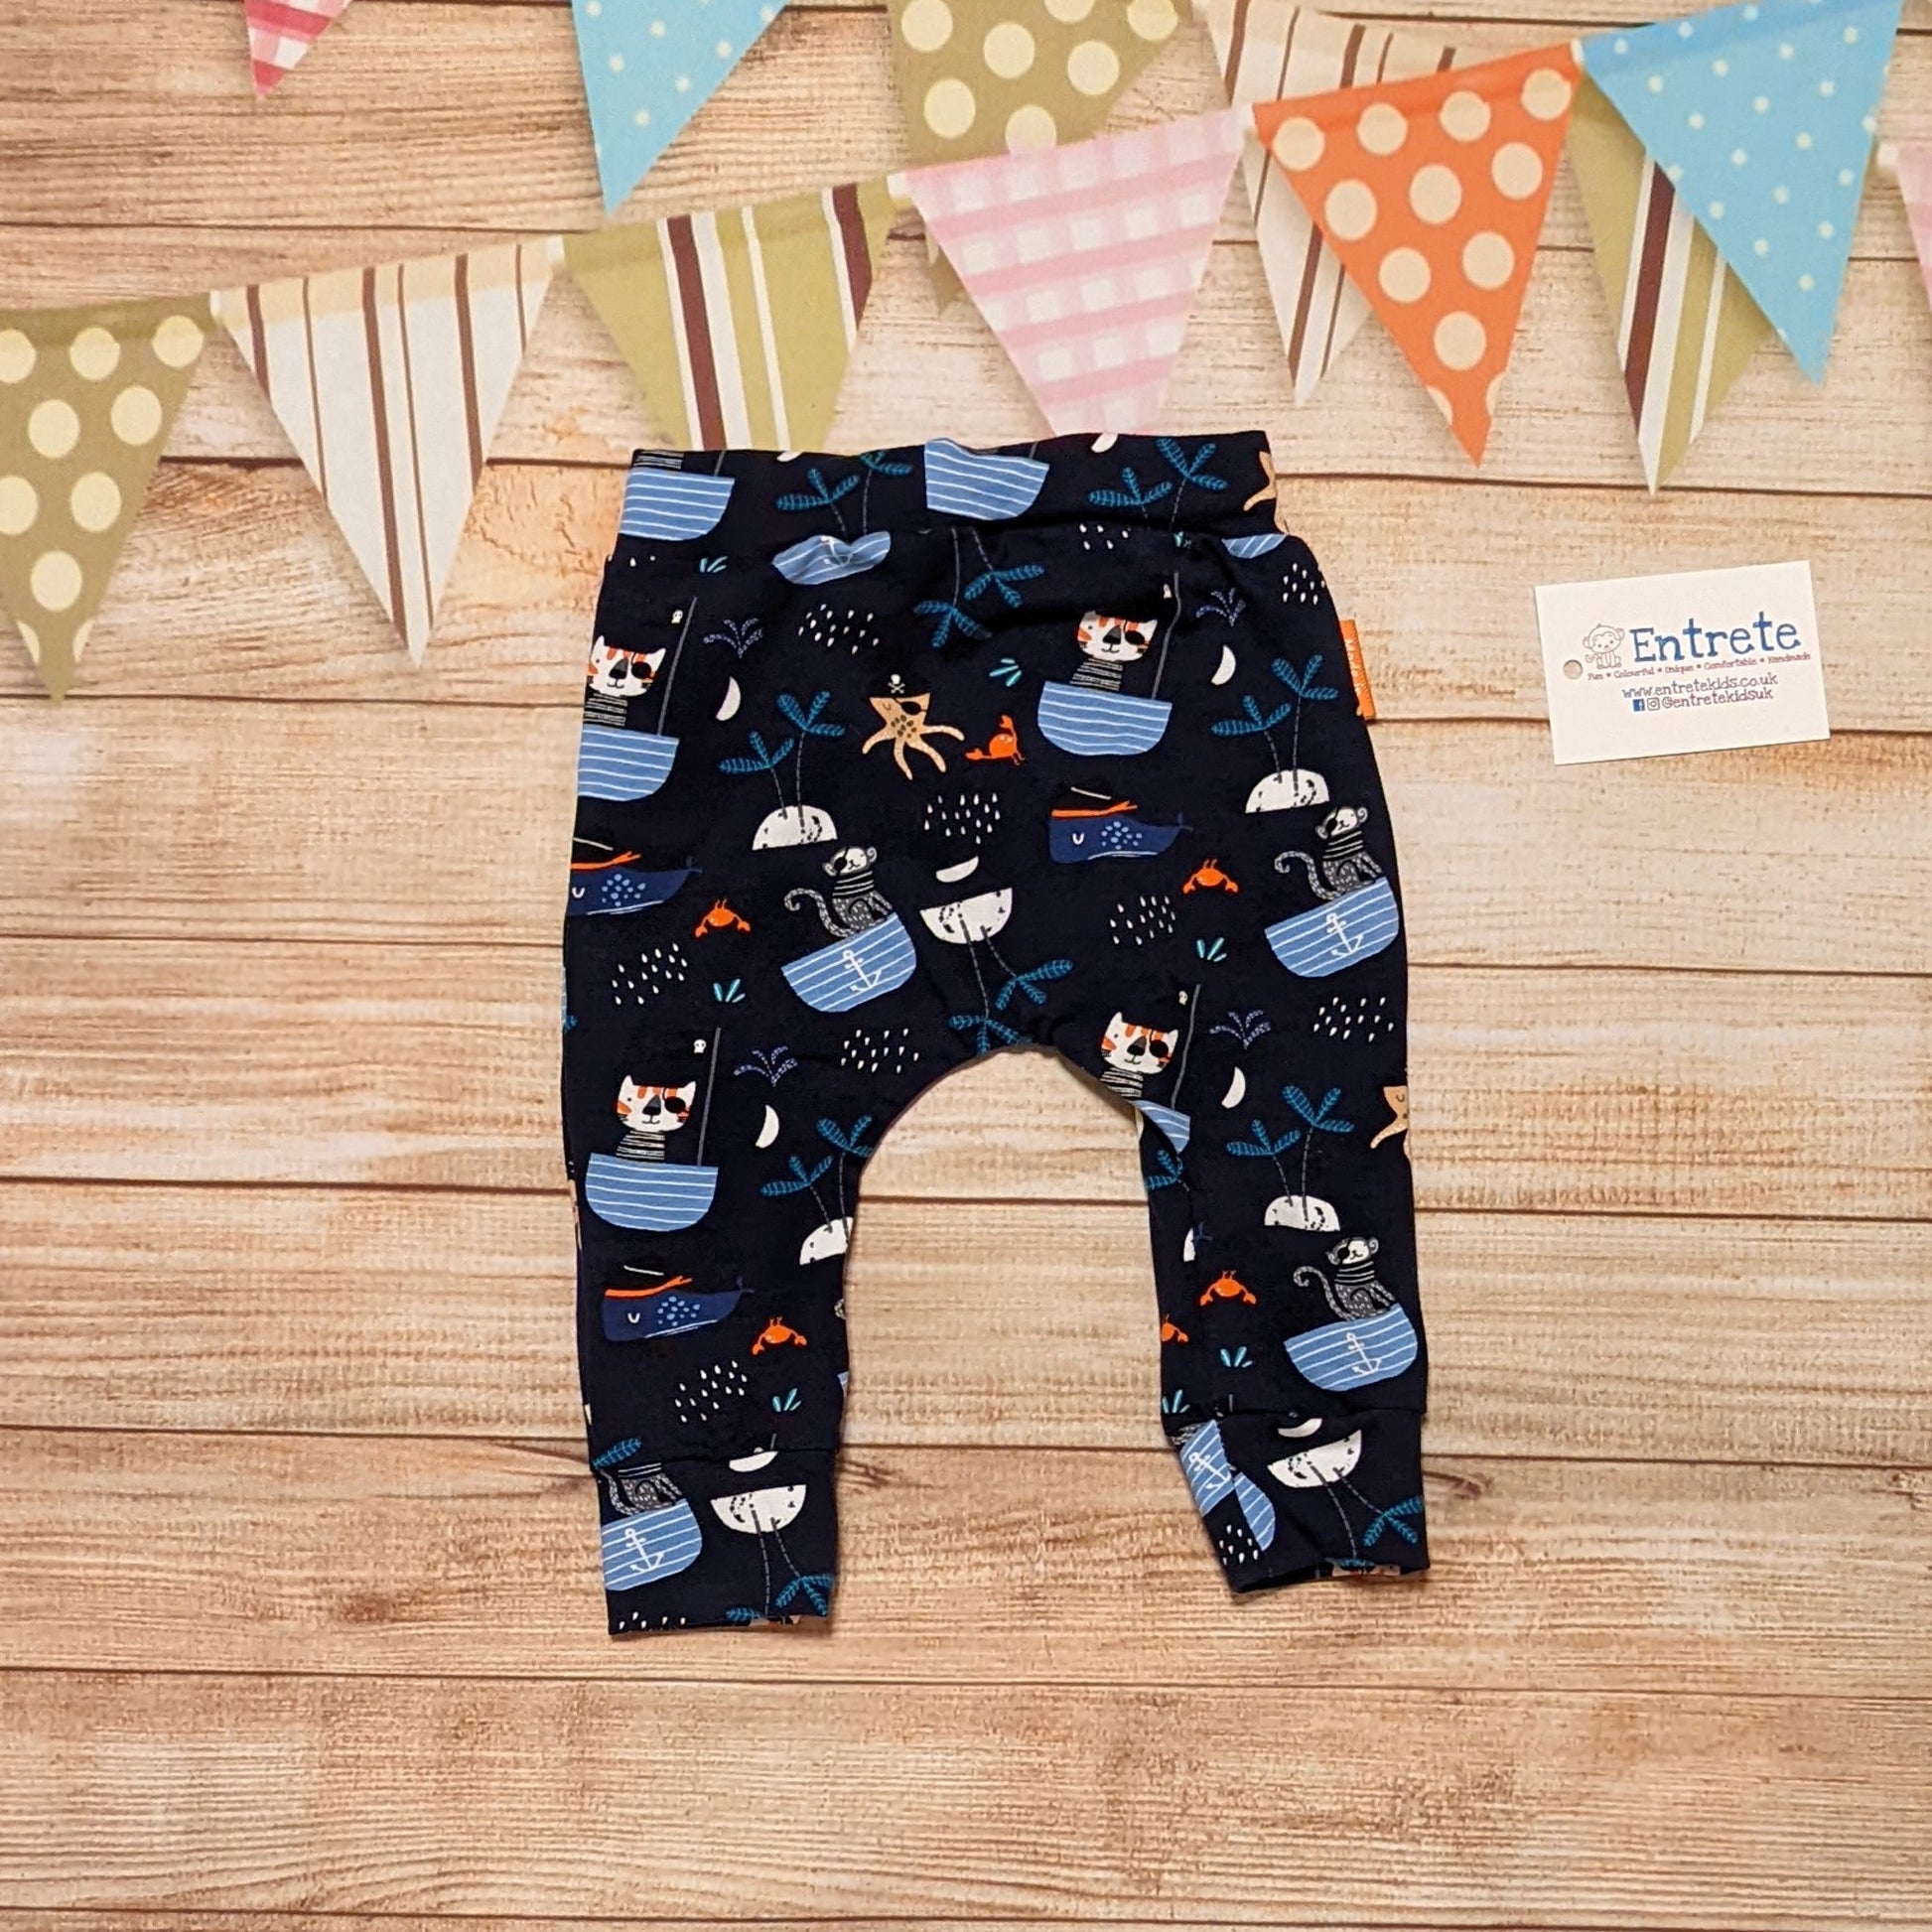 Fun and adventure await, with the pirate cats harem joggers! Shown from the rear. Handmade using pirate cats cotton jersey.